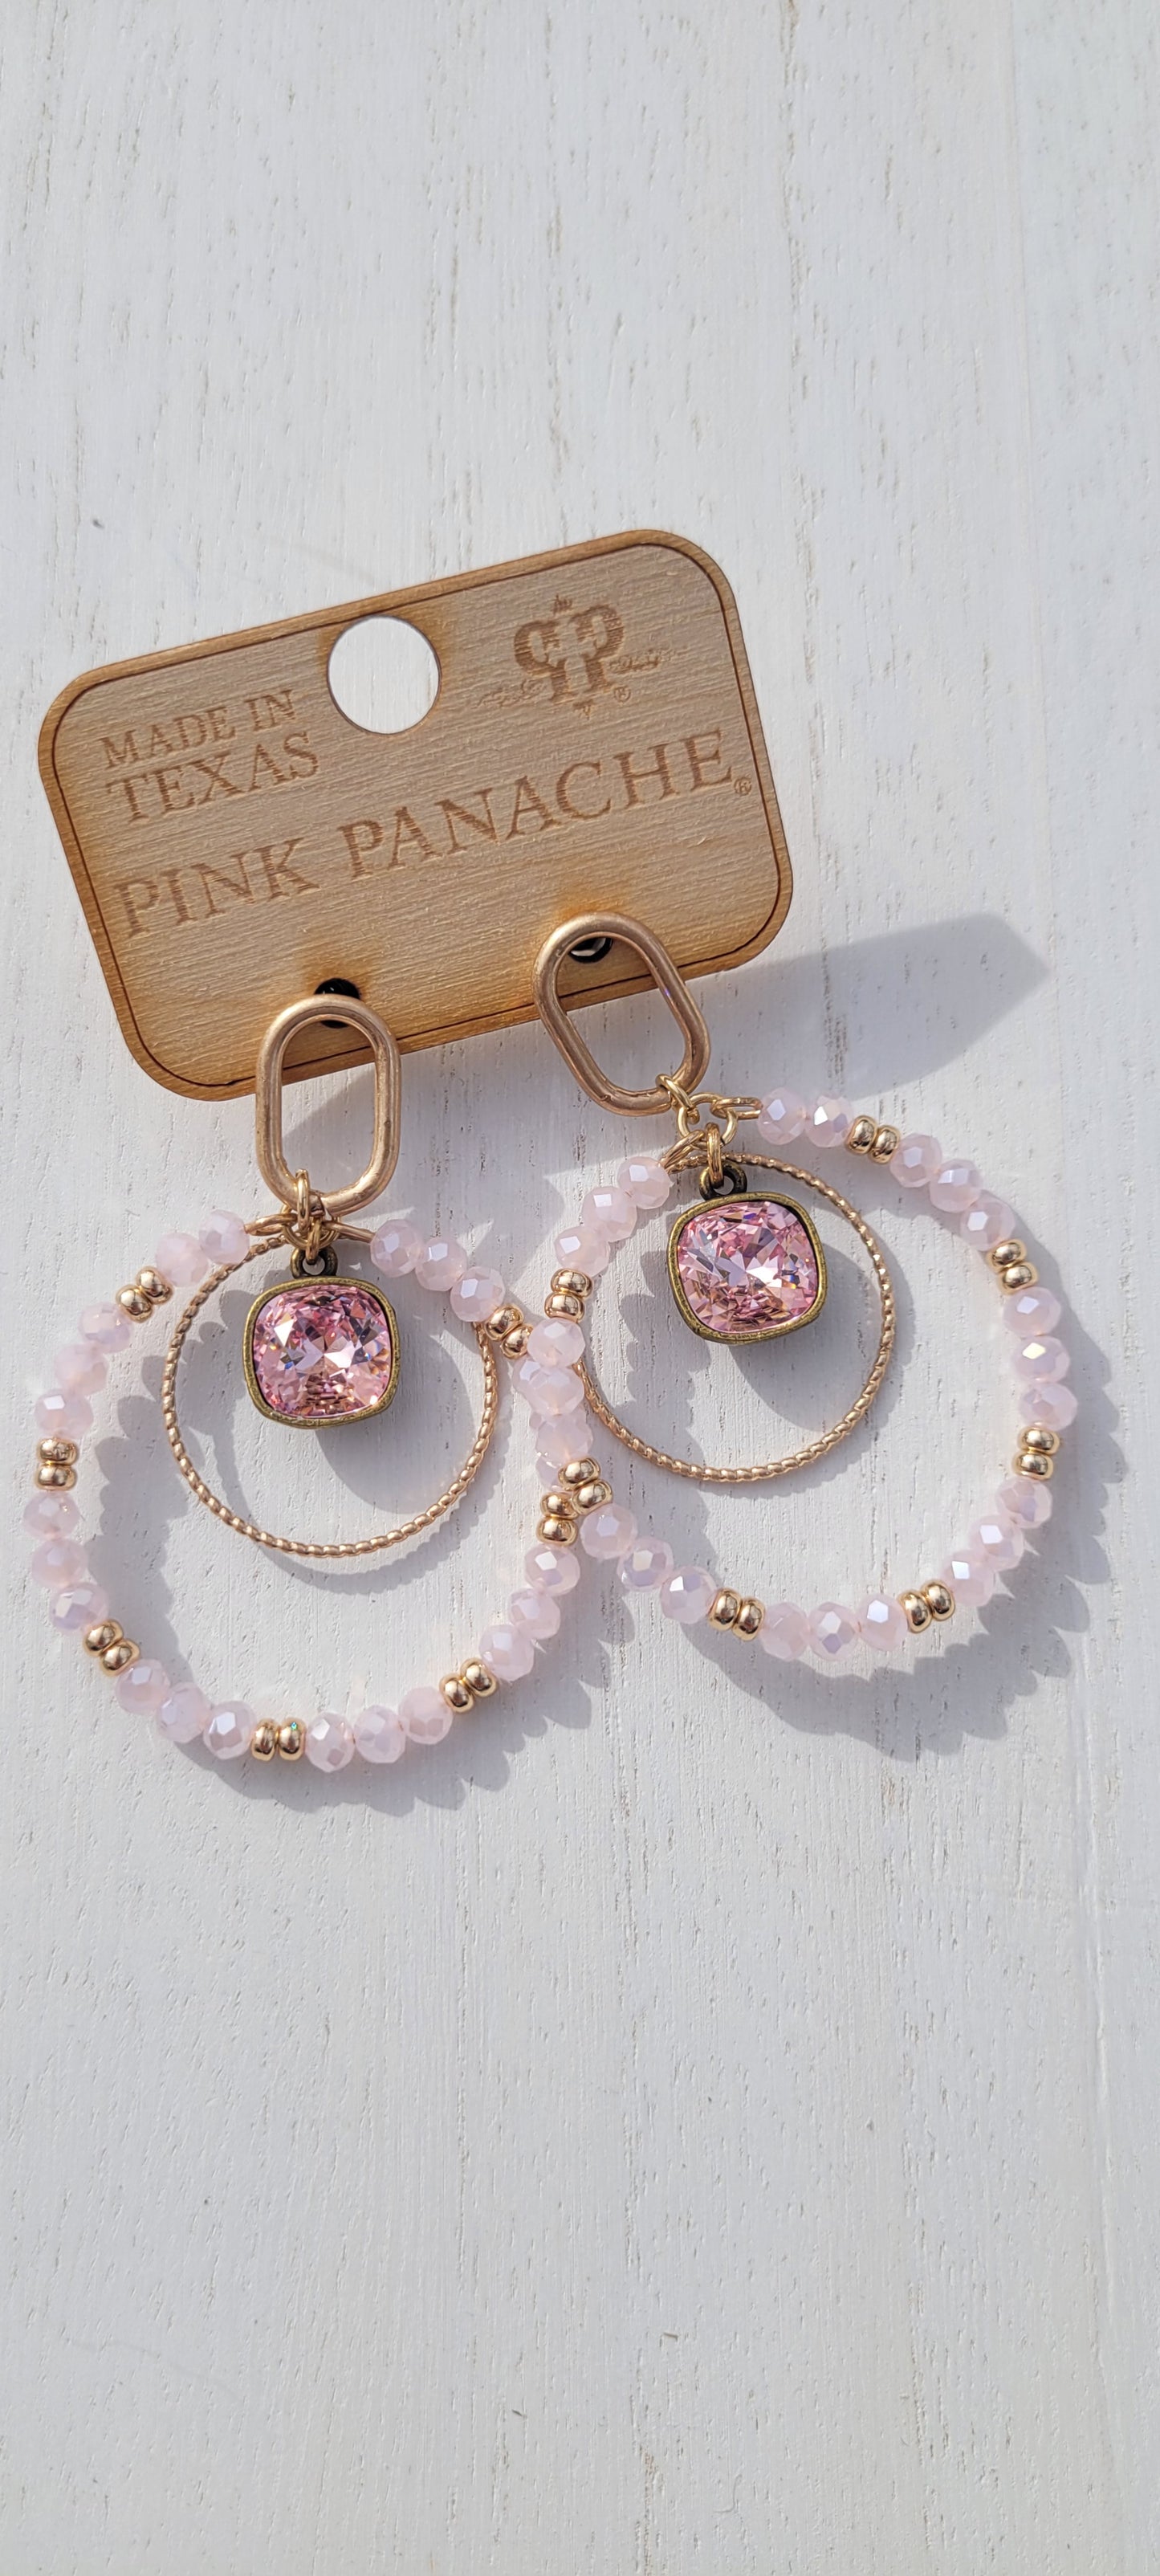 Pink Panache Earrings Color: Pink bead circle hoop with gold circle, 10mm bronze/light rose cushion cut drop on gold oval shape post earring Limited supply!   